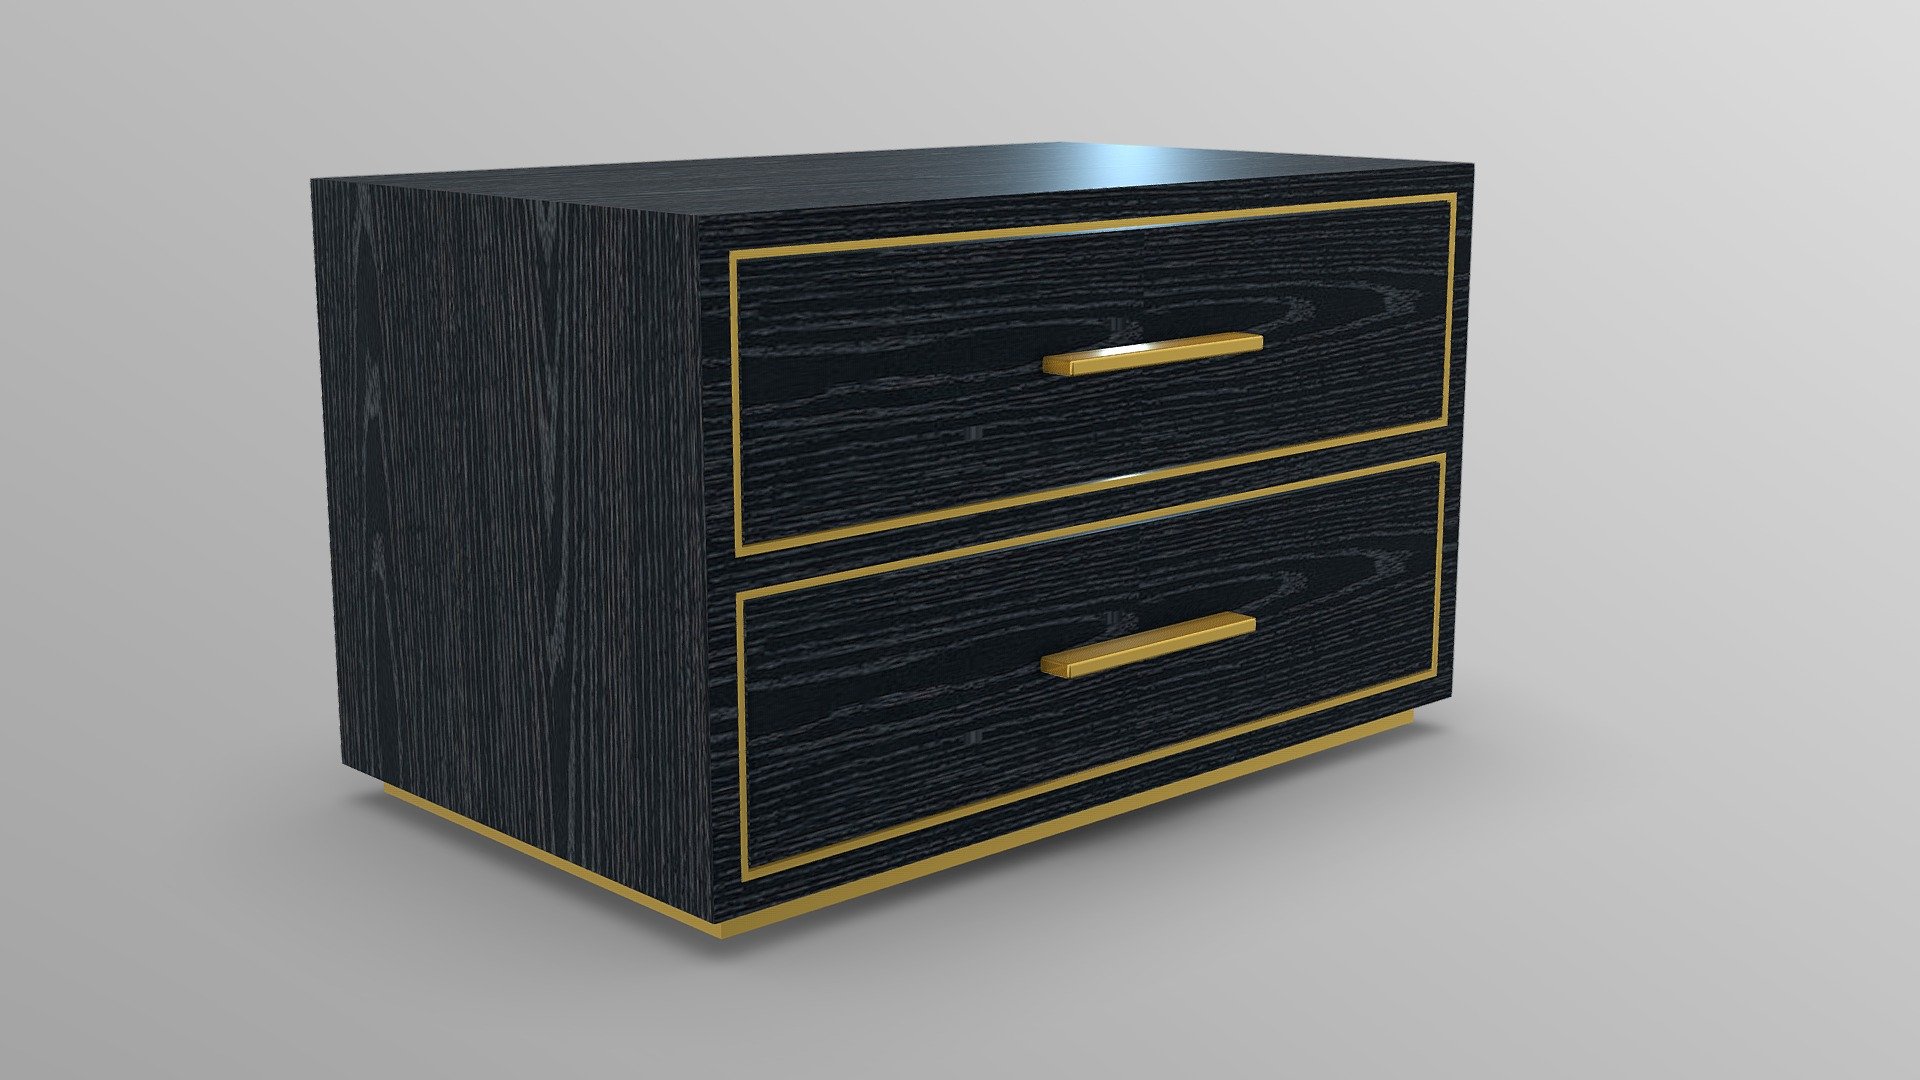 Bed side table complete drawing with internal drawers and holes for screws.
Metal profile around the drawers.
dimensions: 700x420x420mm - Nightstand Bedside Table with 2 drawers - Buy Royalty Free 3D model by 3DTechDesign (@3DTechDesignCo.Ltd) 3d model